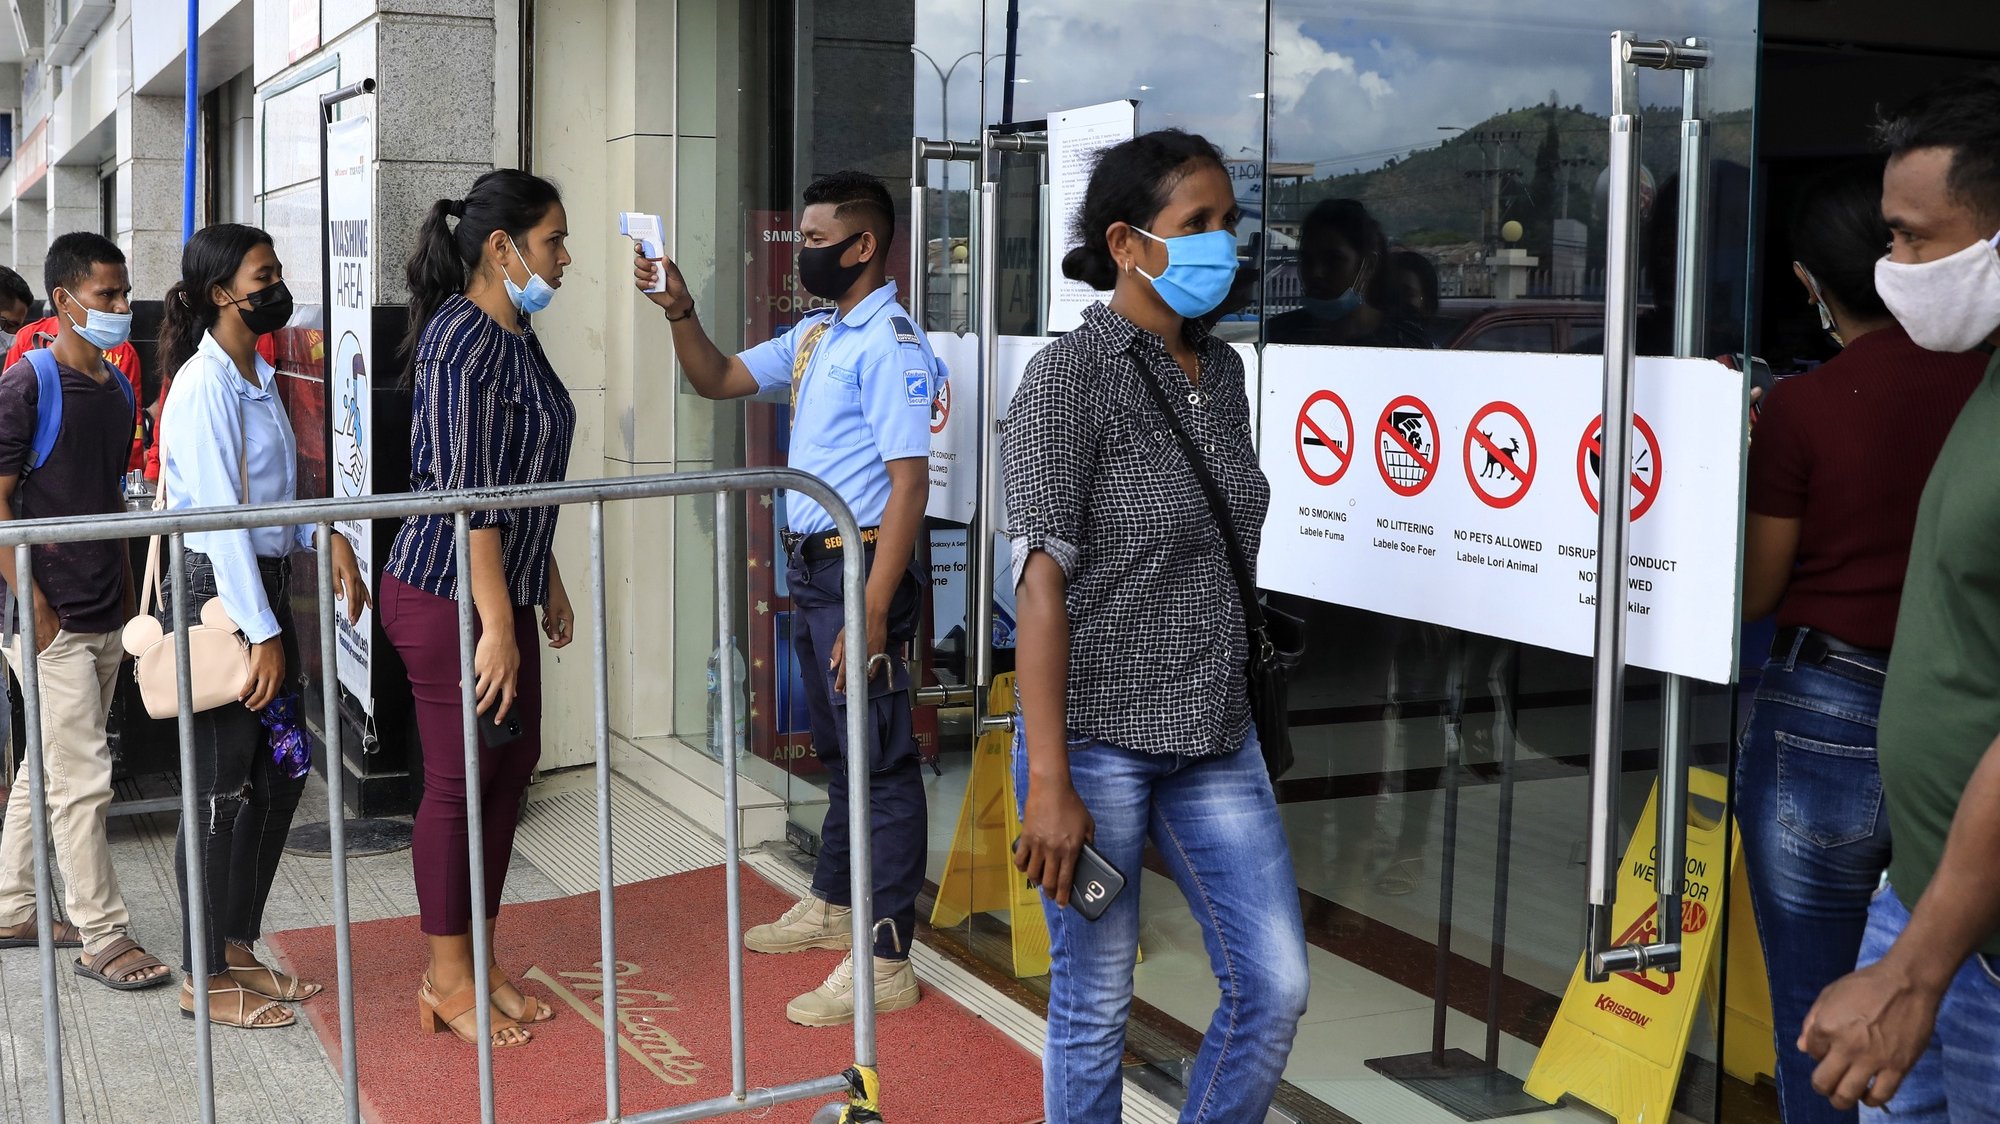 epa08936477 A security guard checks the body temperature of customers before they enter a shopping mall amid the ongoing COVID-19 disease pandemic in Dili, East Timor, also known as Timor Leste, 11 January 2021 (issued 14 January 2021). According to reports Timor Leste is considered successful in overcoming the pandemic and recorded as the second-smallest outbreak in Southeast Asia after Laos. Timor Leste has 49 cases with zero death while the neighbouring country Indonesia is struggling as one of the worst outbreaks in the region. The country imposed a state of emergency a week after the Catholic-majority nation reported its first case on 21 March 2020, and enforced strict border controls.  EPA/ANTONIO DASIPARU